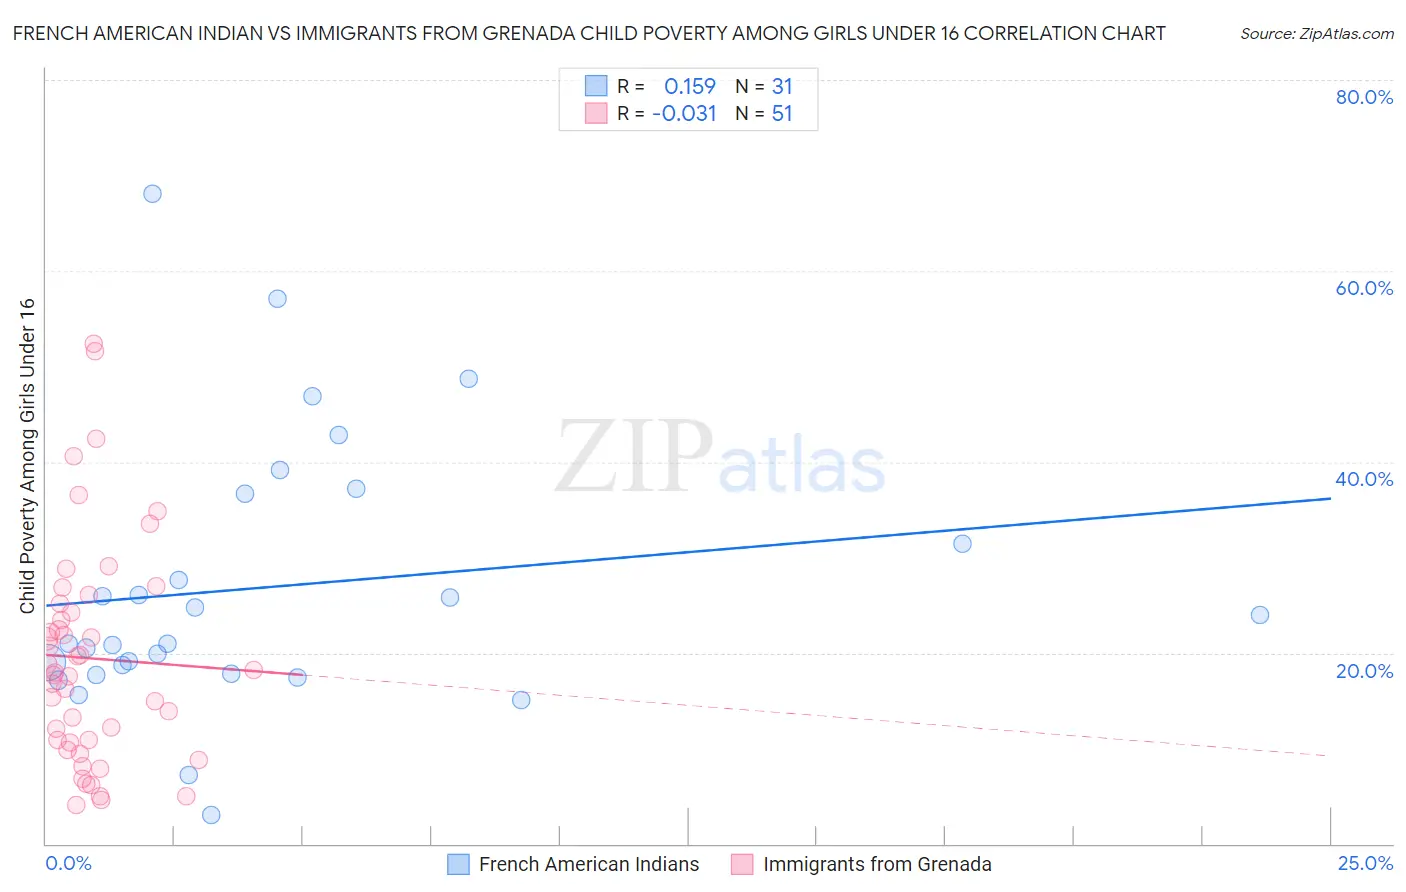 French American Indian vs Immigrants from Grenada Child Poverty Among Girls Under 16